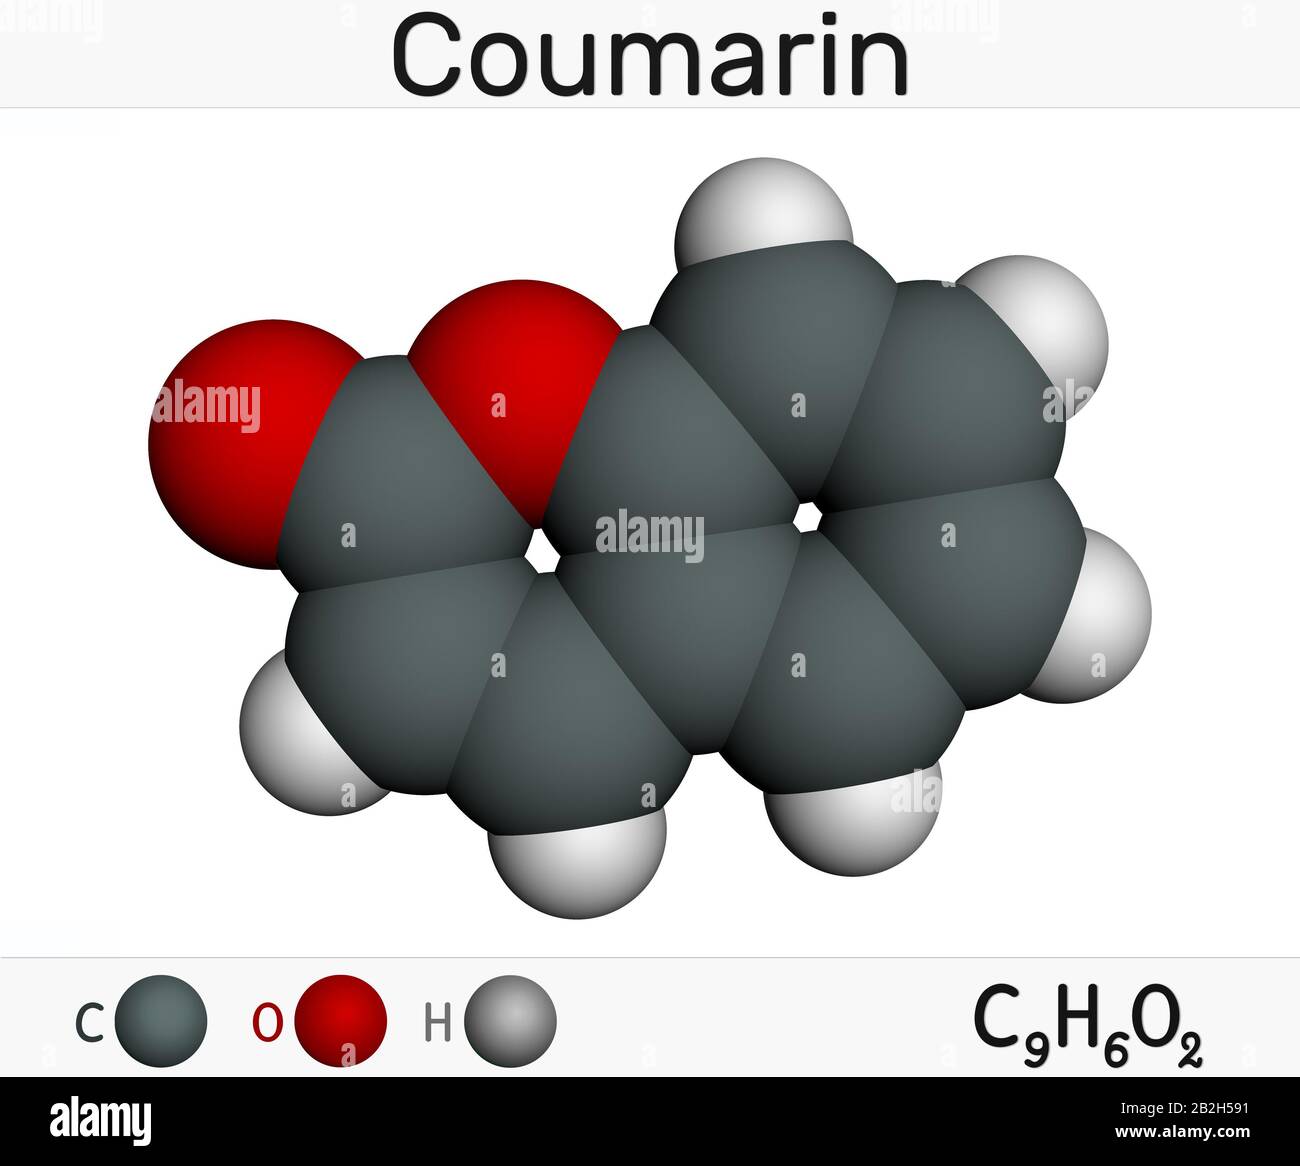 Coumarin, C9H6O2 molecule. It has sweet odor, recognised as scent of newly-mown hay. Coumarinic compounds are a class of lactones. Molecular model. 3D Stock Photo